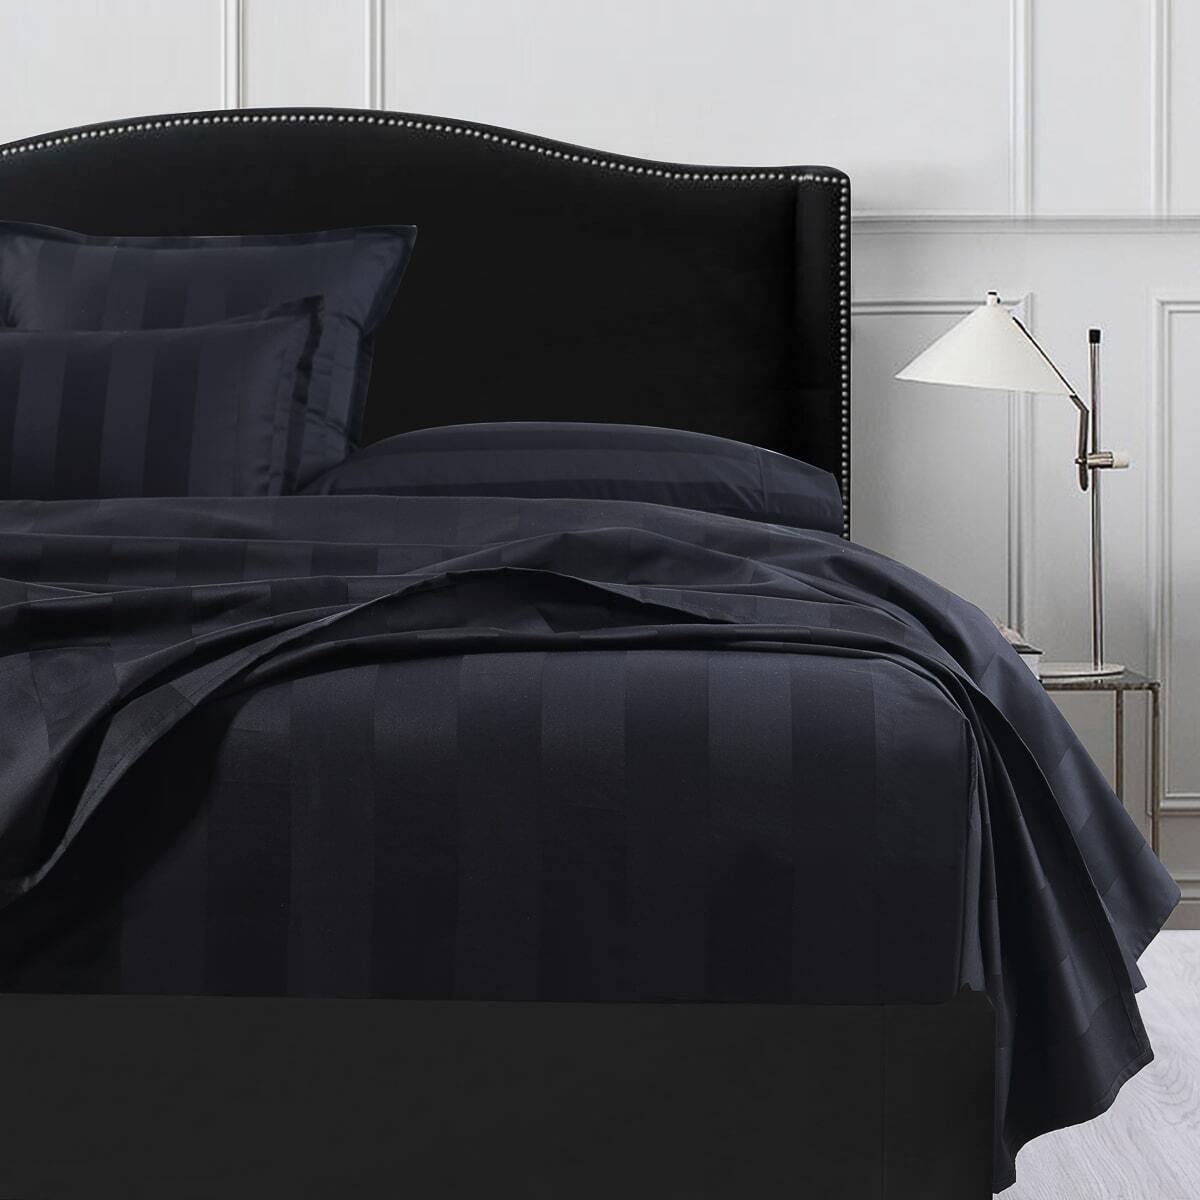 Bespoke 1200TC Fitted Sheet Black Queen Bed